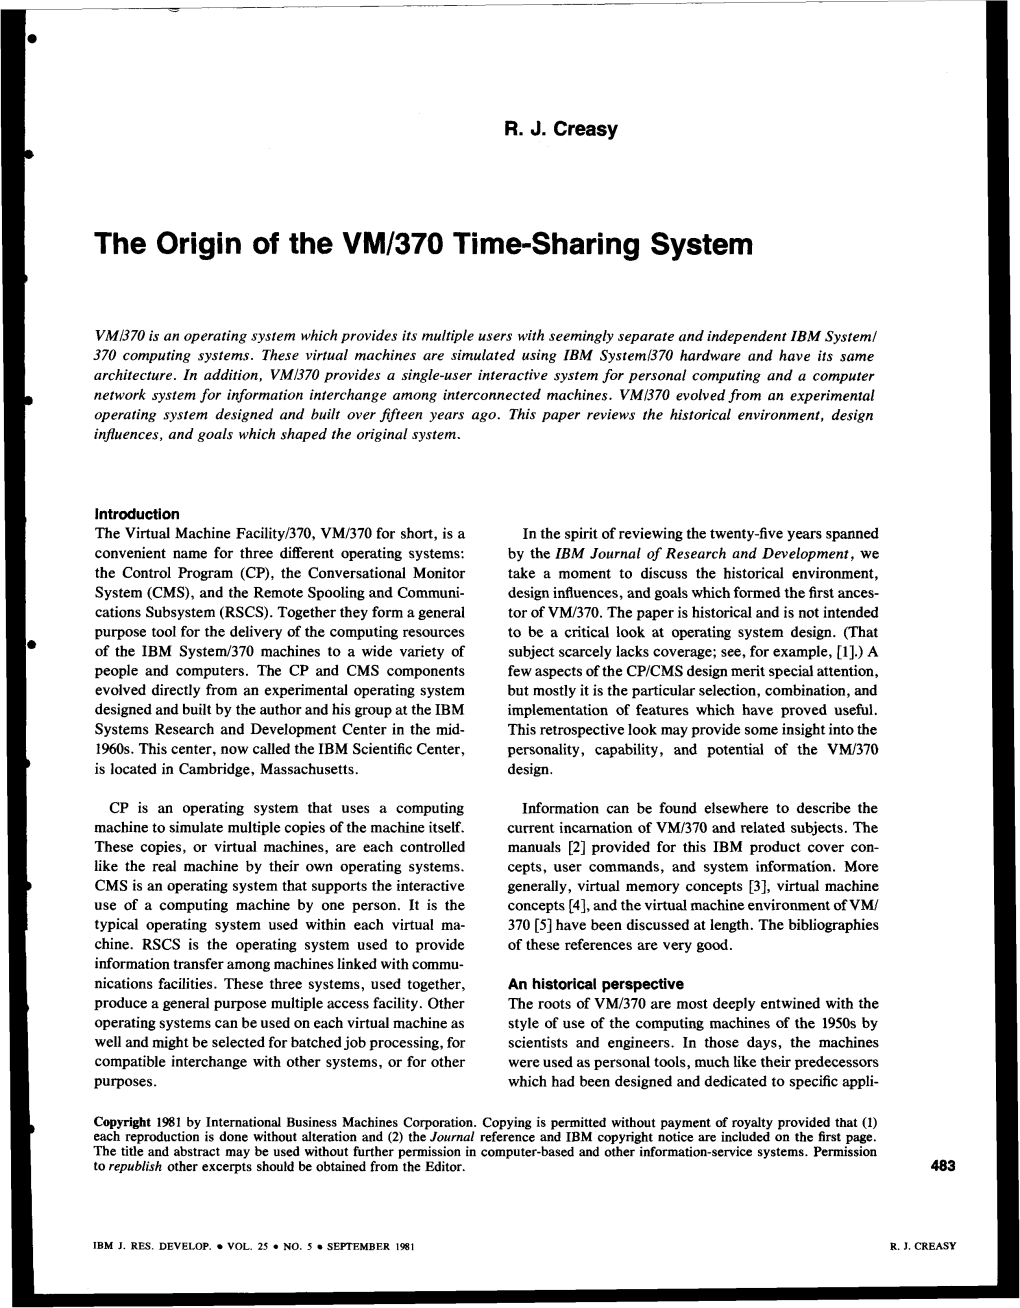 The Origin of the VM/370 Time-Sharing System